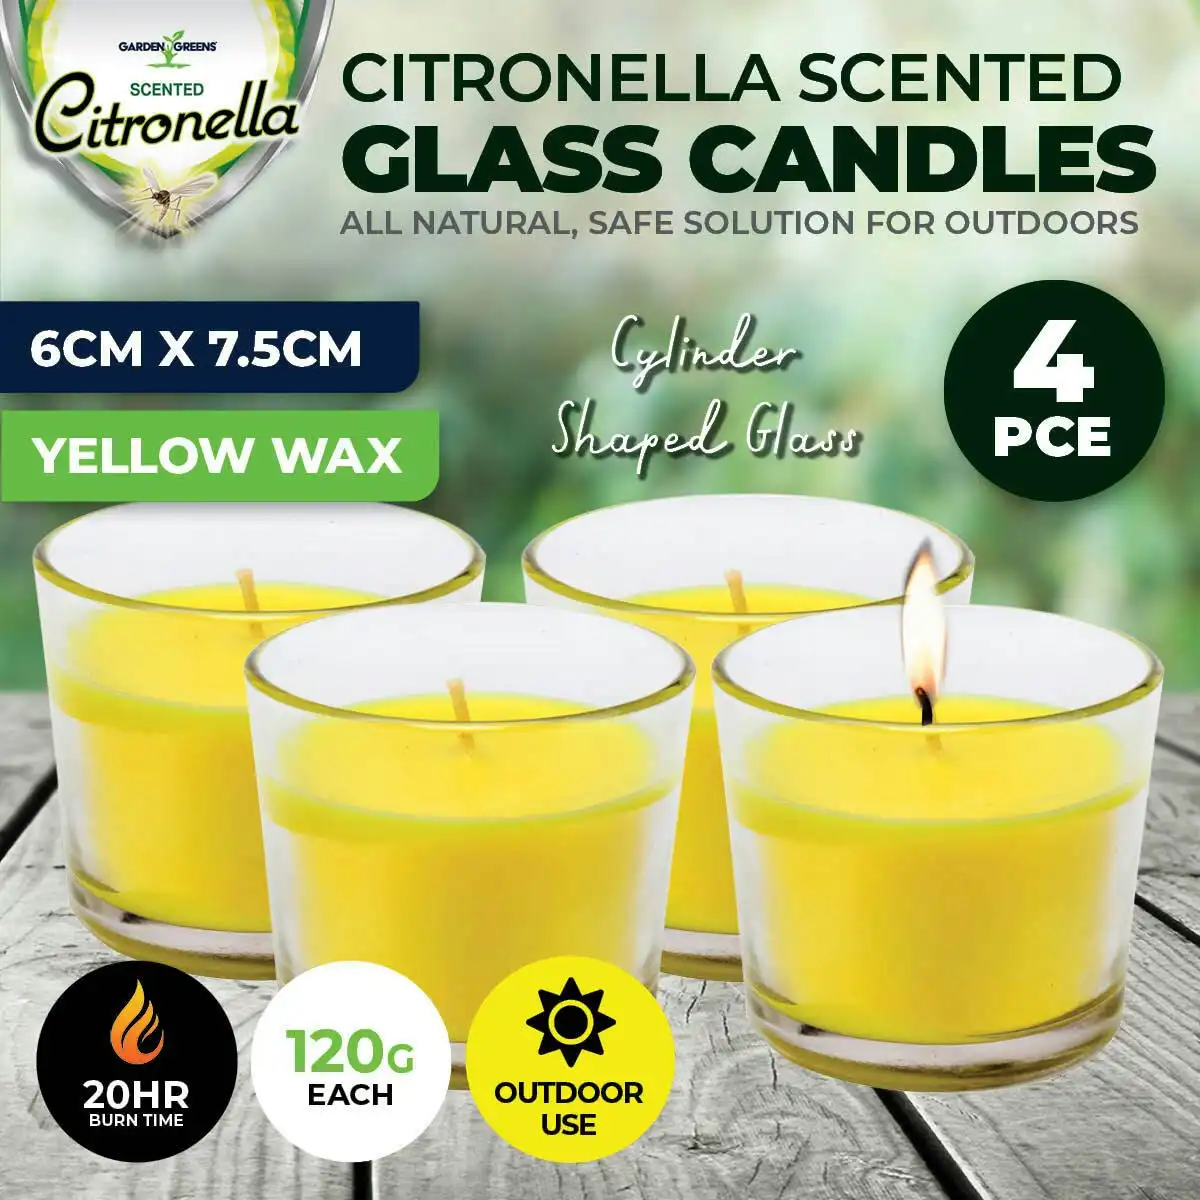 Garden Greens 4PCE Citronella Scented Candles Cylinder Glass Jars 120g